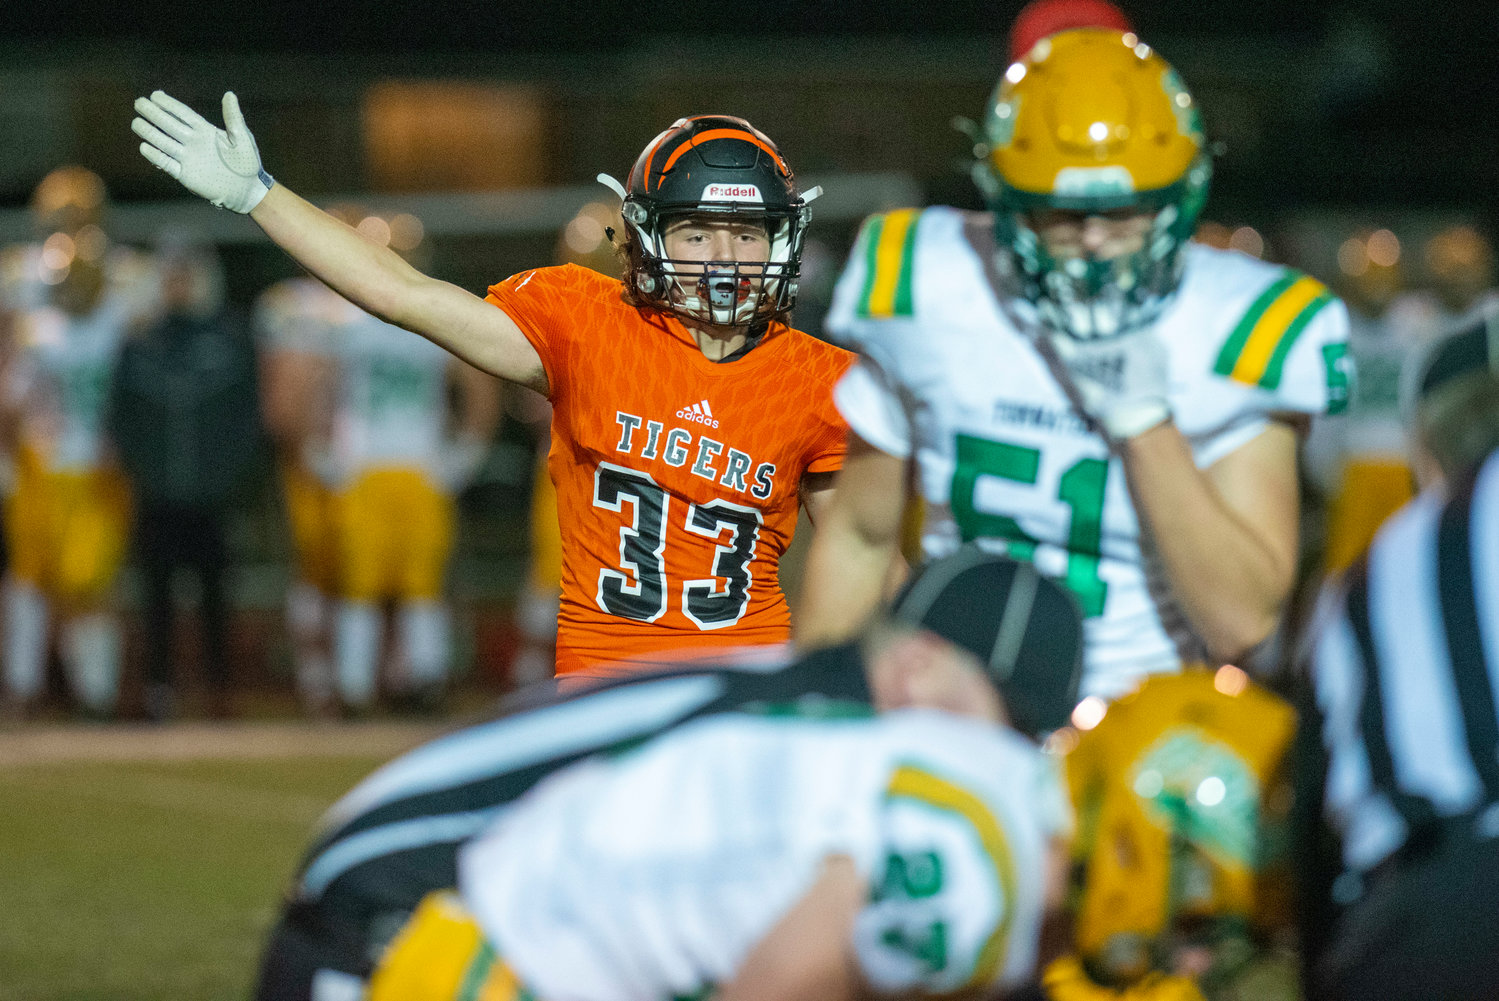 Centralia’s Blake Seymour (33) signals a first down for the Tigers against Tumwater at Tiger Stadium Oct. 29.